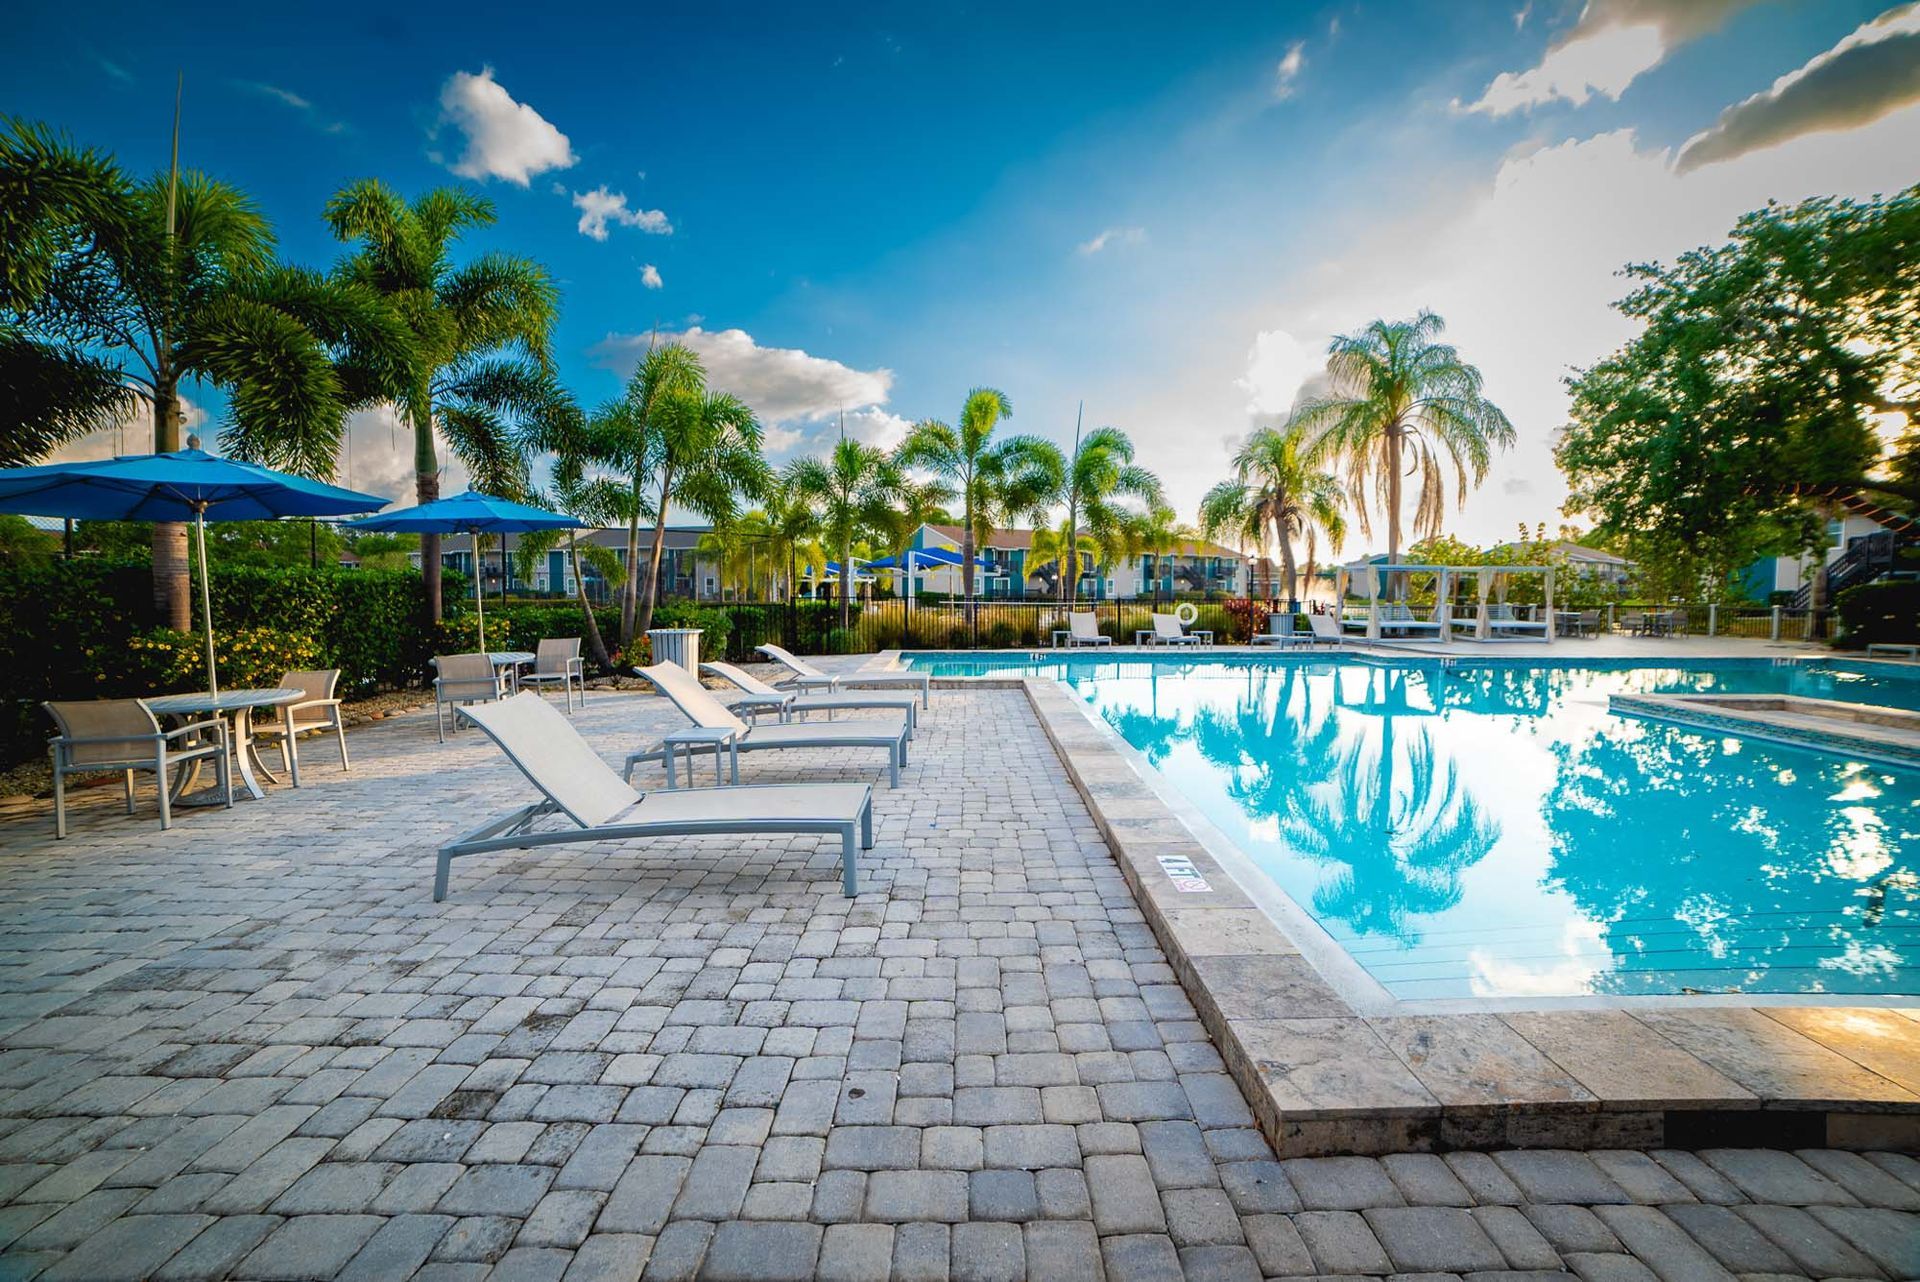 Luxury Apartments for Rent in St. Petersburg - Trellis at the Lakes - Pool with Tables, Umbrellas, Lounge Chairs, and Palm Trees.